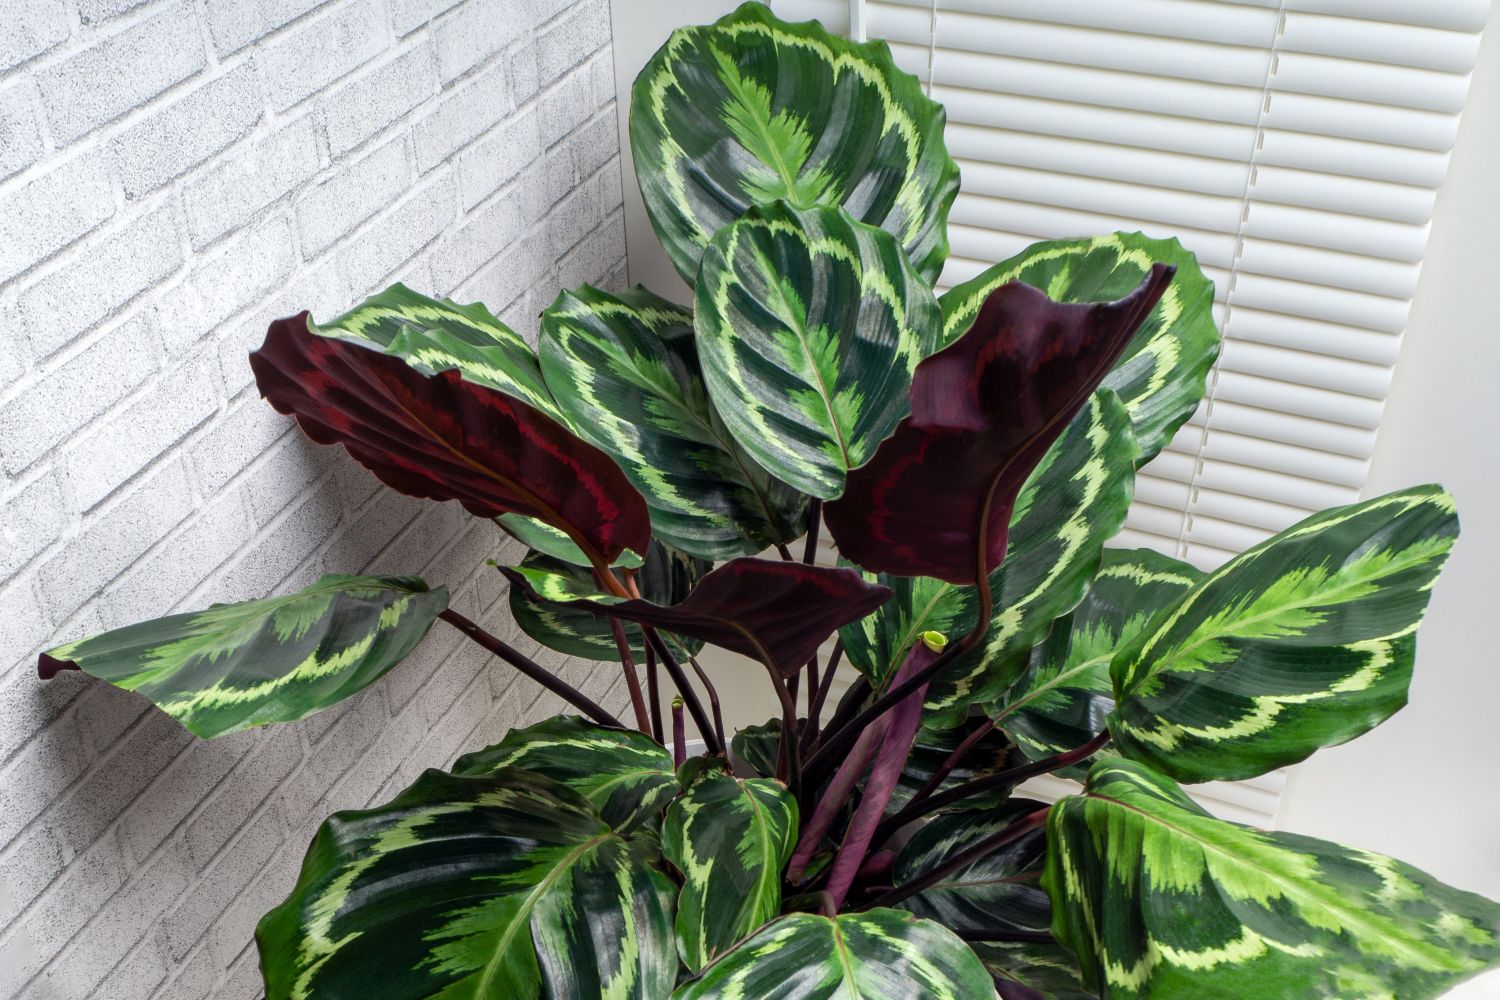 Calathea leaves with red underside